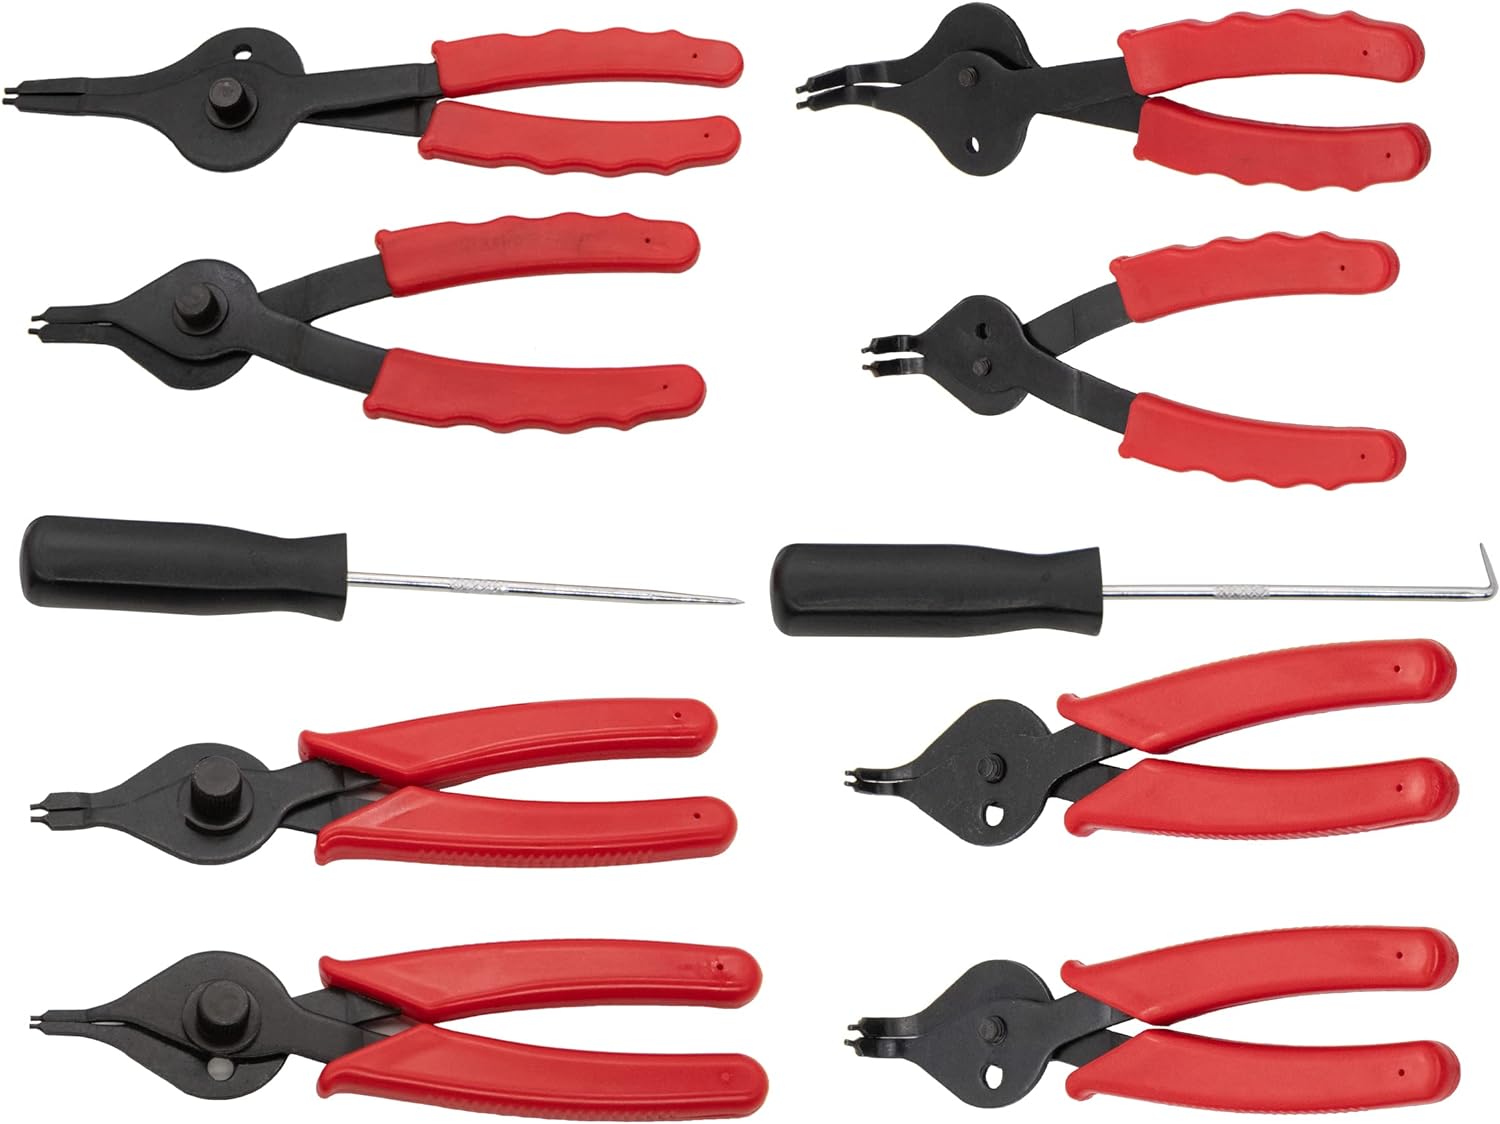 OEN Snap Ring Pliers Set Tools,(11 Piece) .038in - .09in for Automobiles Lawnmowers and Farm Equipment Retaining Snap Ring and Circ